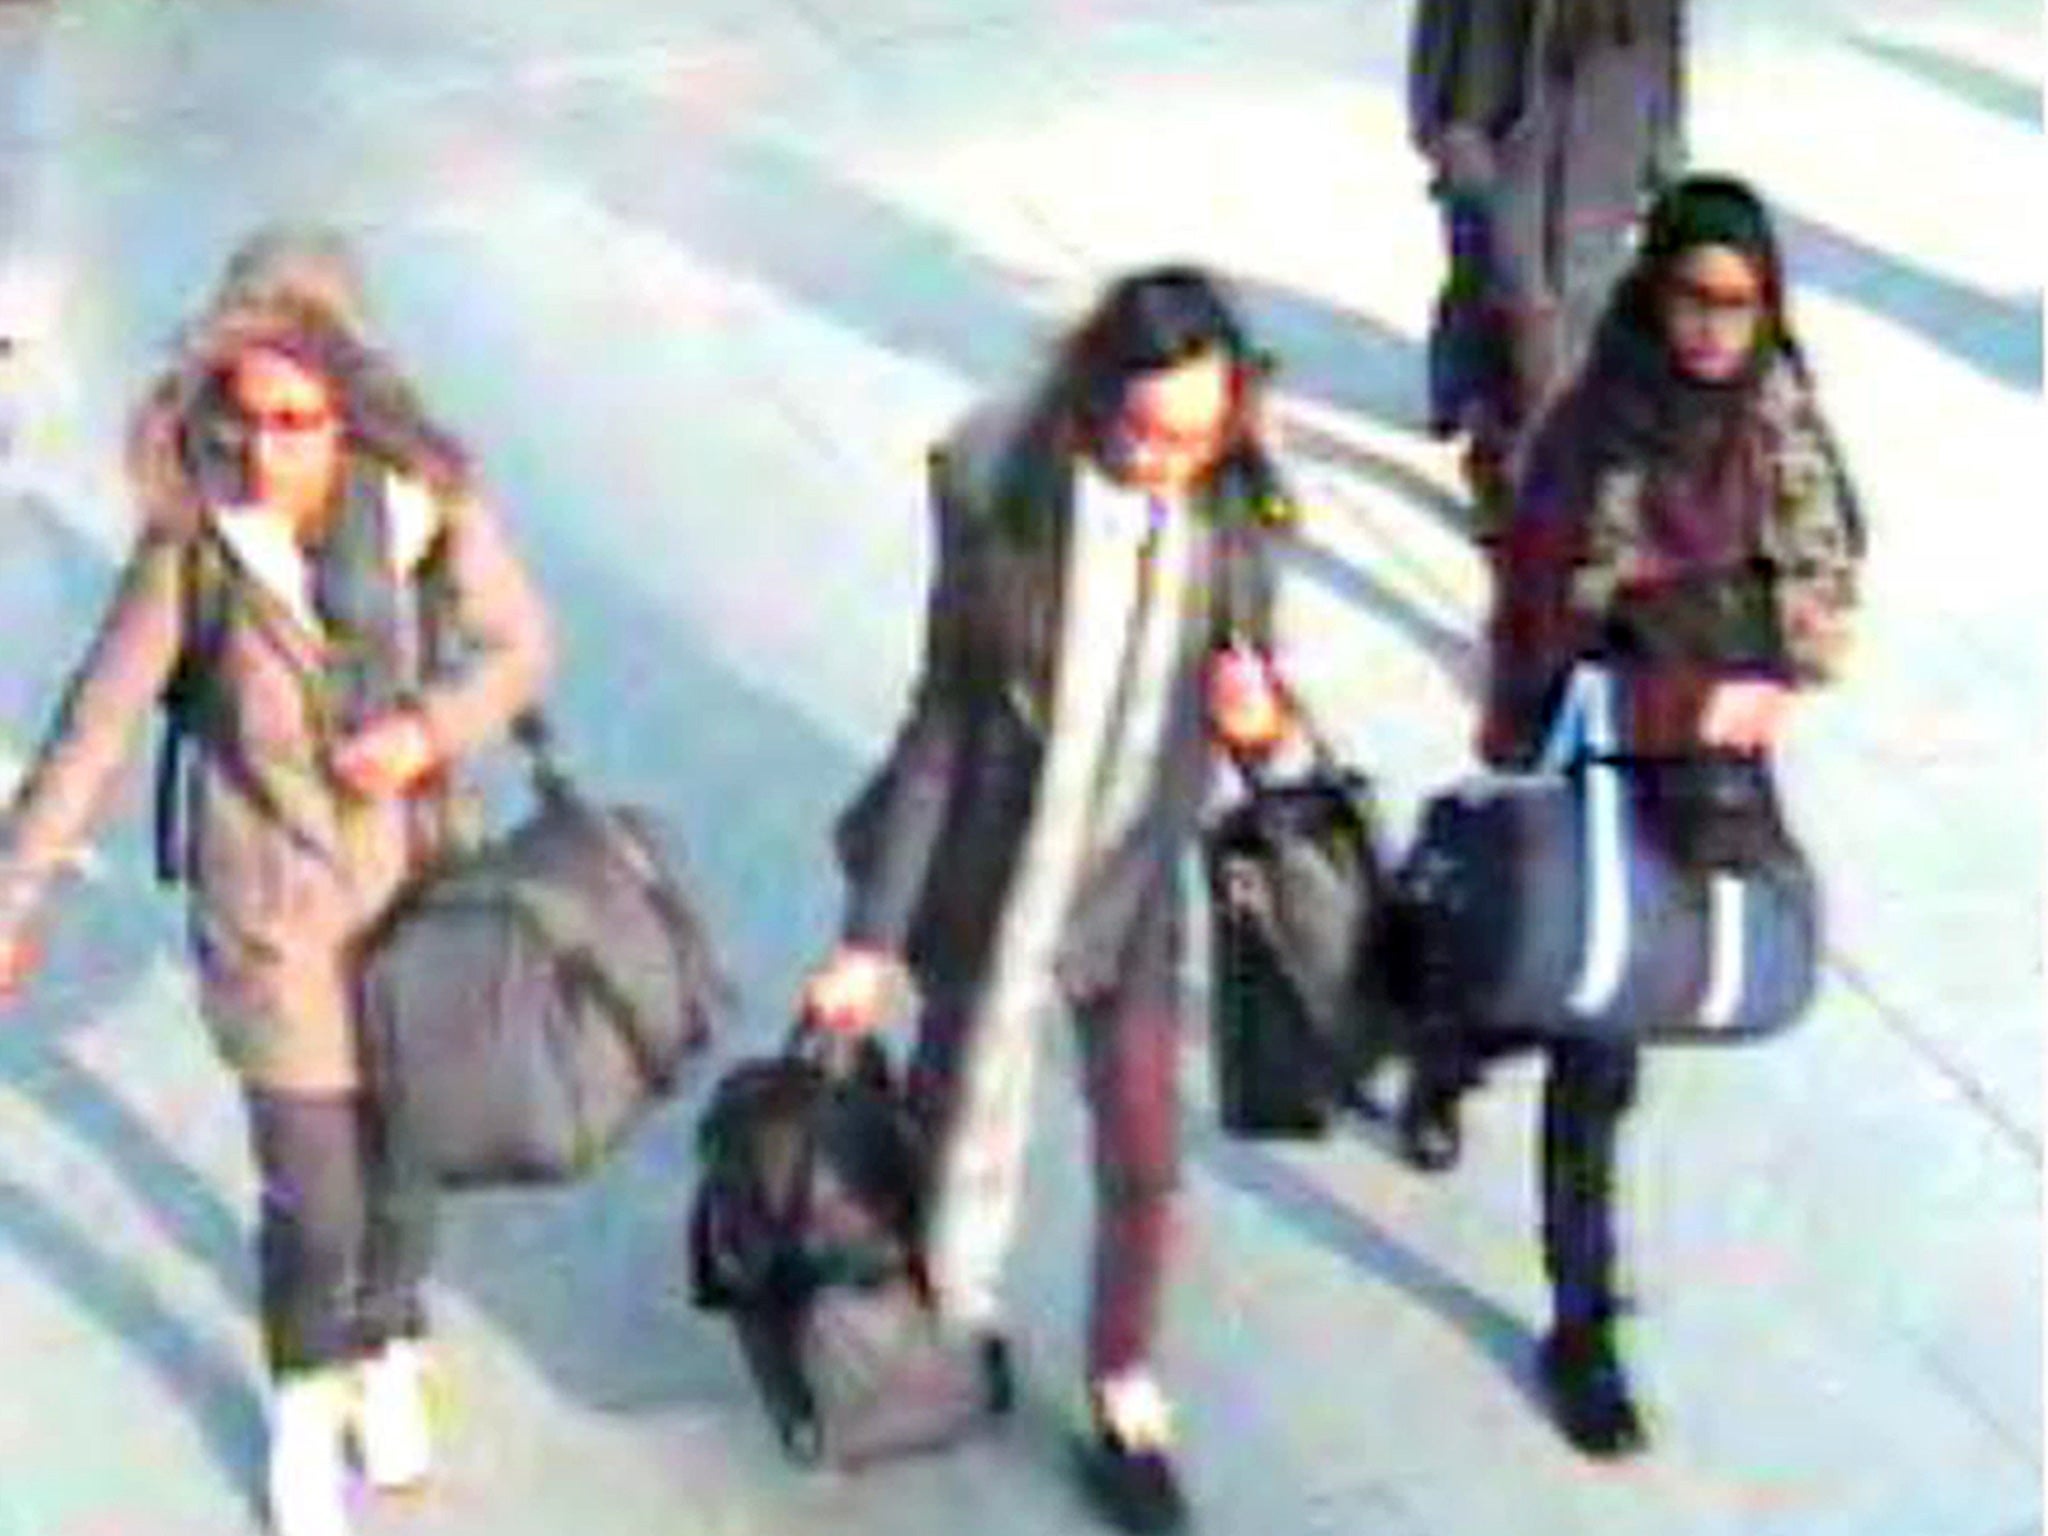 Amira Abase, Kadiza Sultana and Shamima Begum waught on CCTV at Gatwick airport on their way to Turkey last month